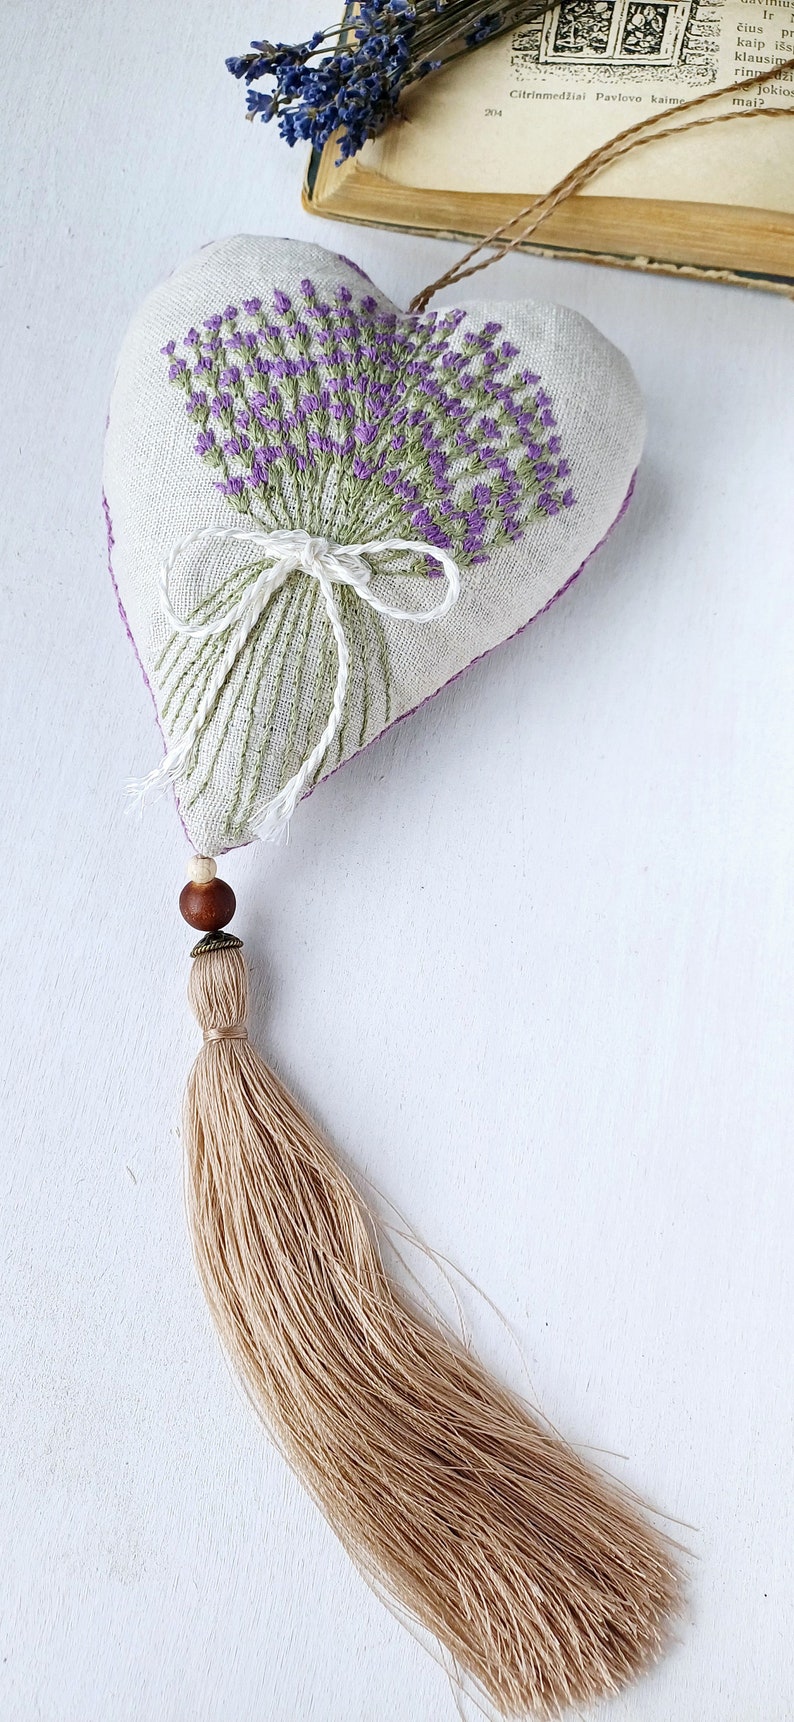 Handmade hand embroidered heart shaped linen sachet with hanging loop and tassel filled with lavender. Embroidered lavenders.